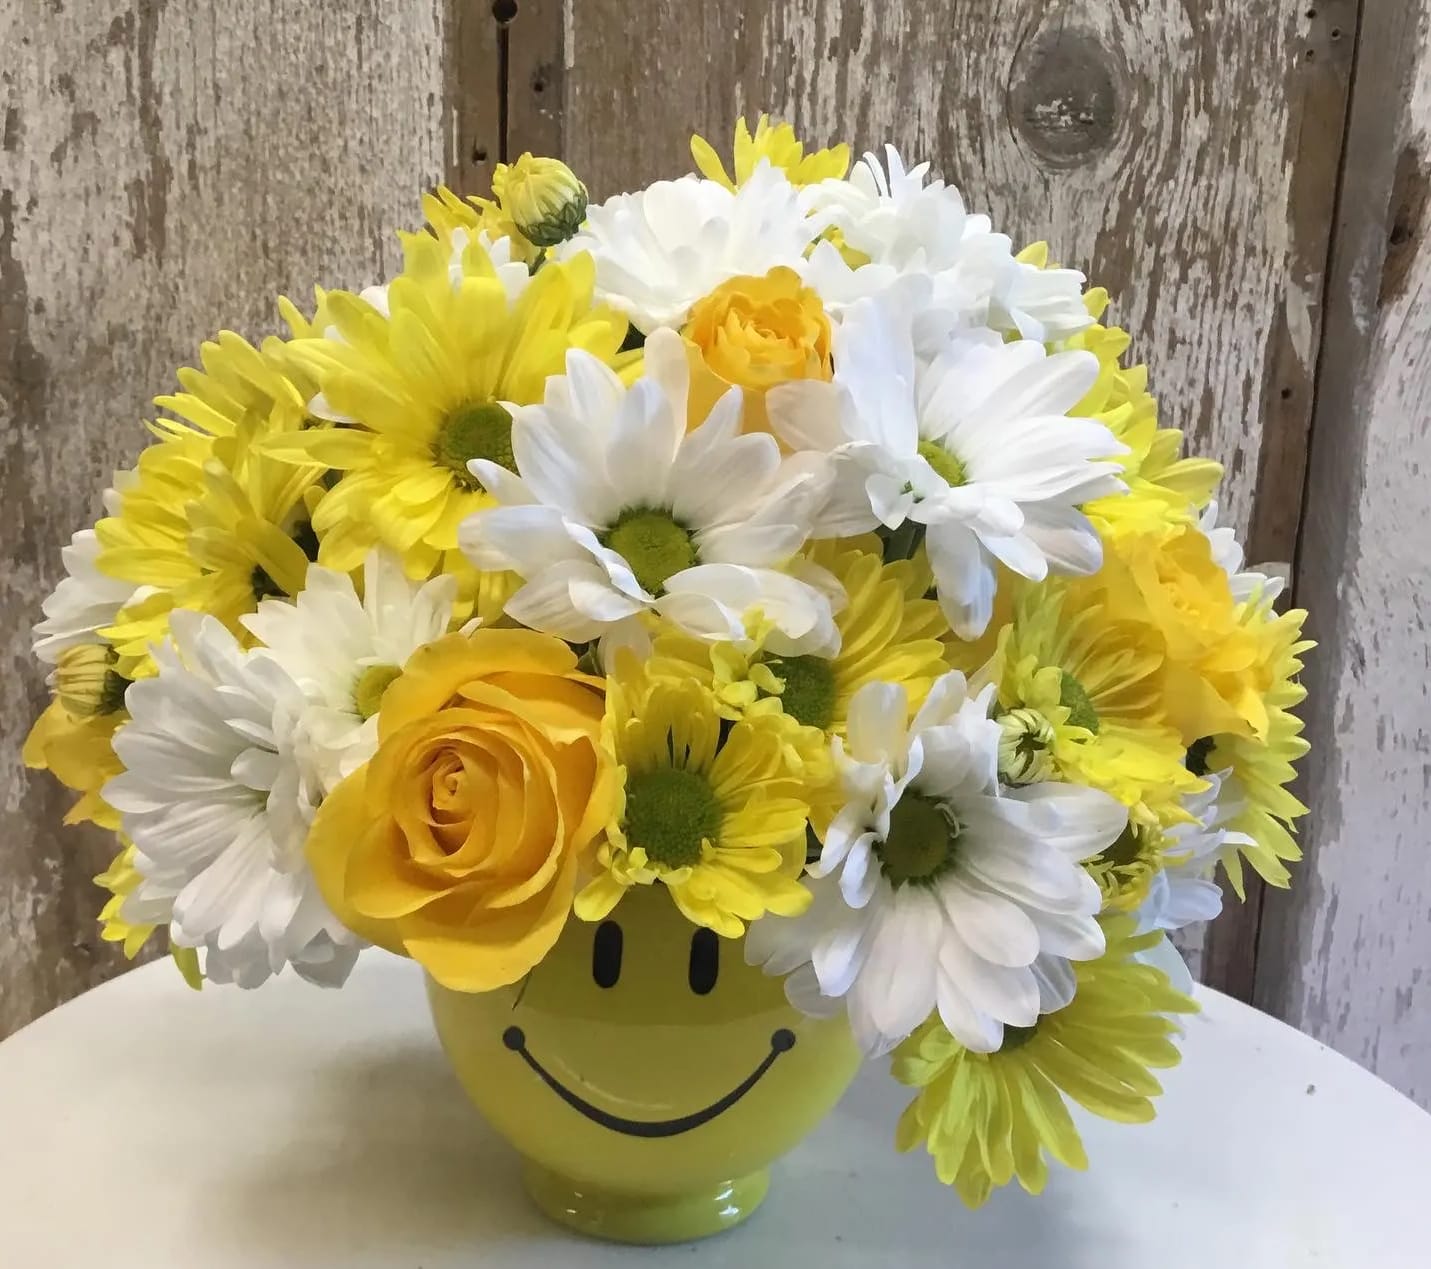 Mr. Sunshine - White and Yellow Daisies or Mums with Yellow Roses